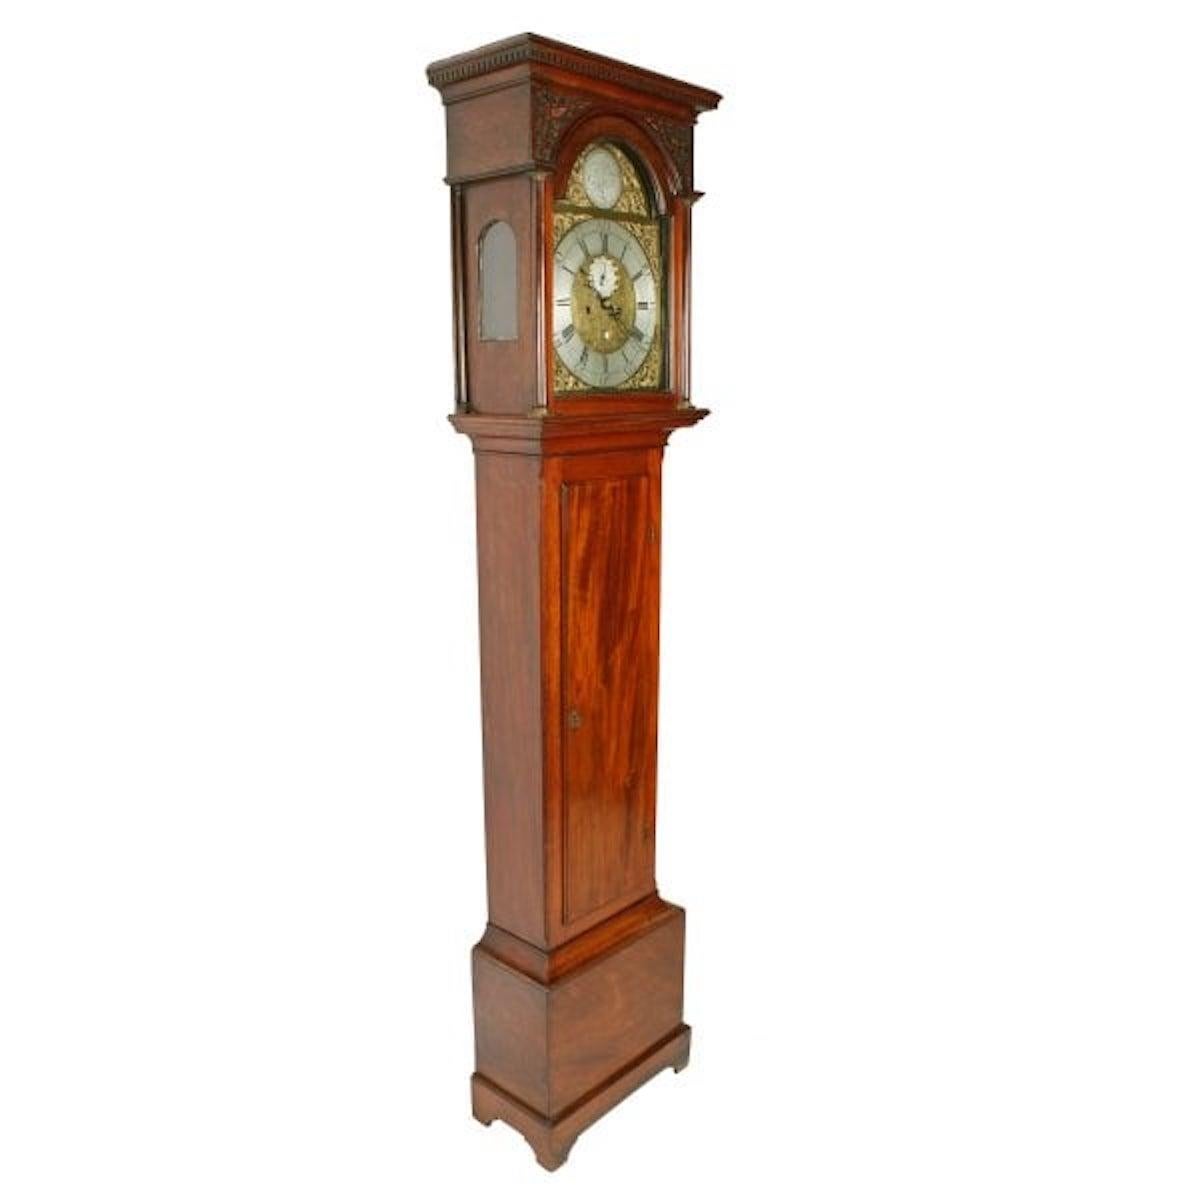 Scottish mahogany grandfather clock

An 18th century Scottish mahogany cased Grandfather clock.

The clock has a brass and silverised dial that is beautifully engraved and has a silvered disc to the top that is engraved 'Dan Brown